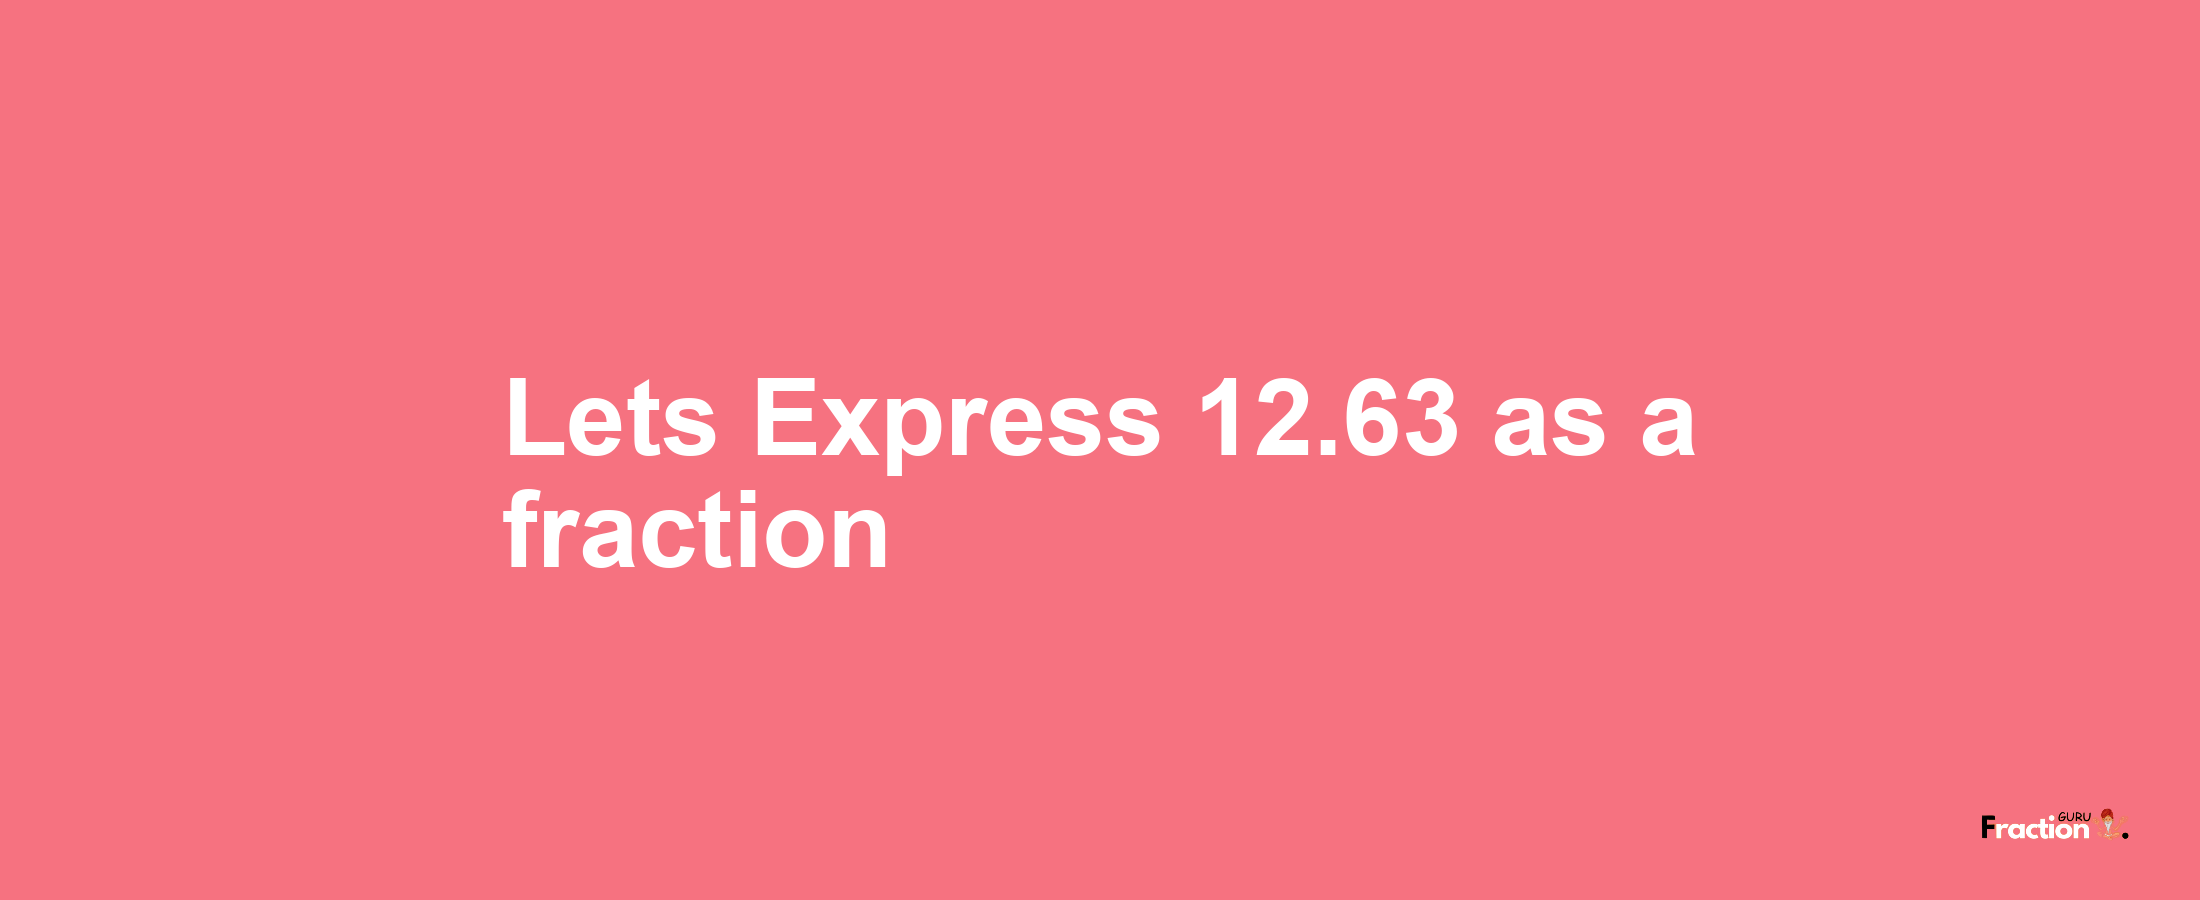 Lets Express 12.63 as afraction